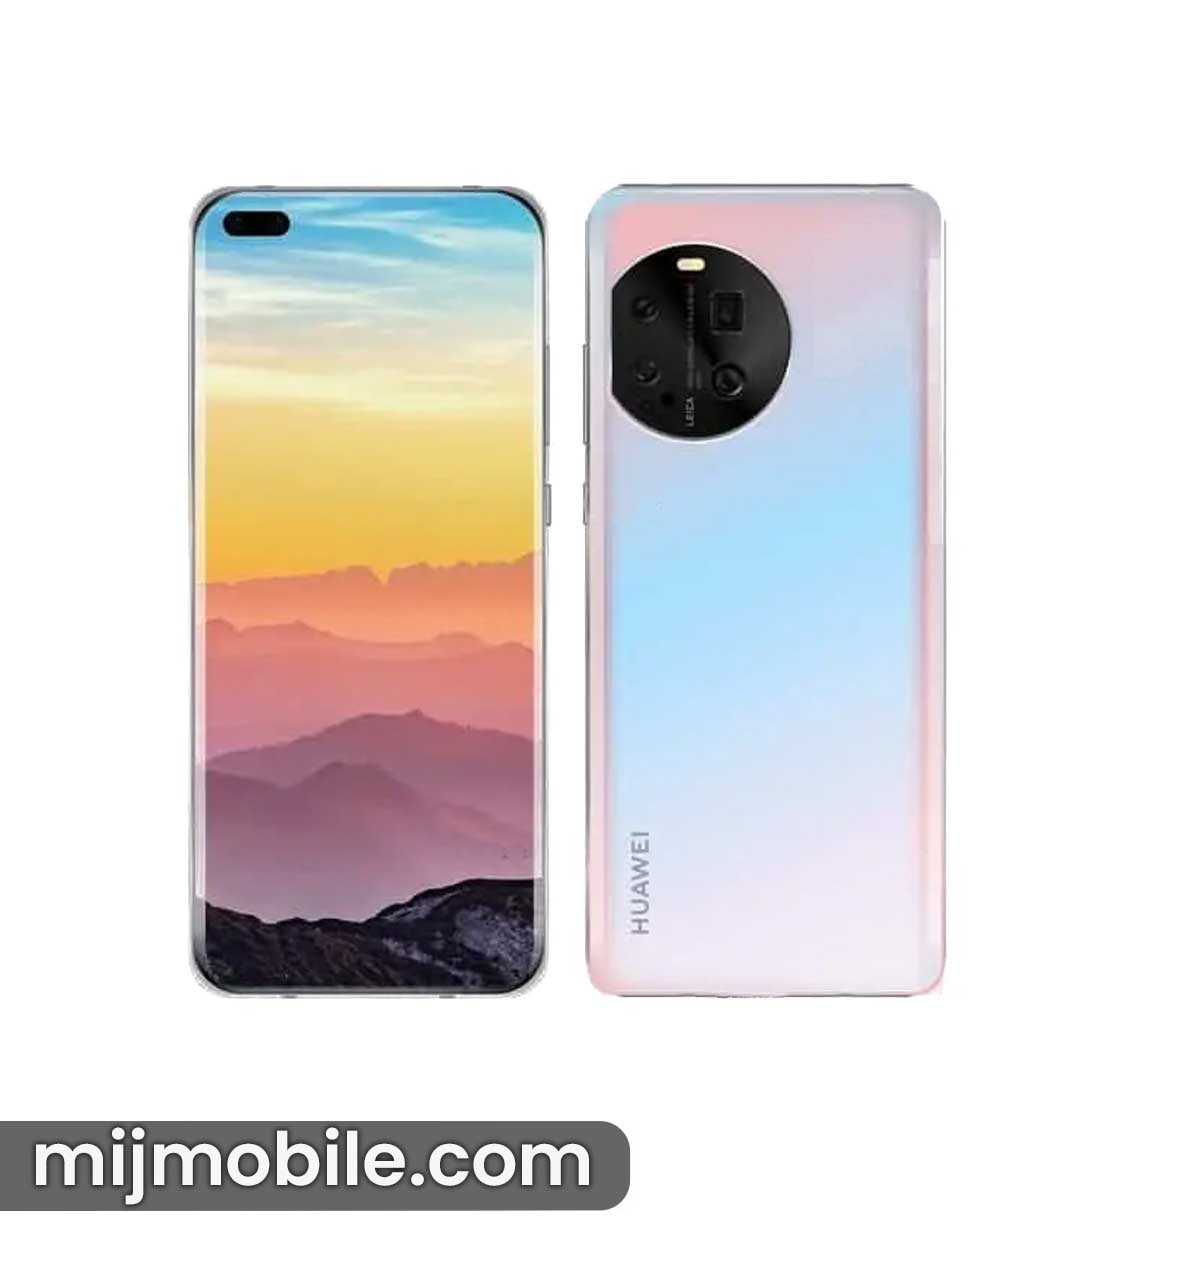 Huawei P50 Pro Price in Pakistan & Specifications Huawei P50 Pro Price in Pakistan is only 159,999.